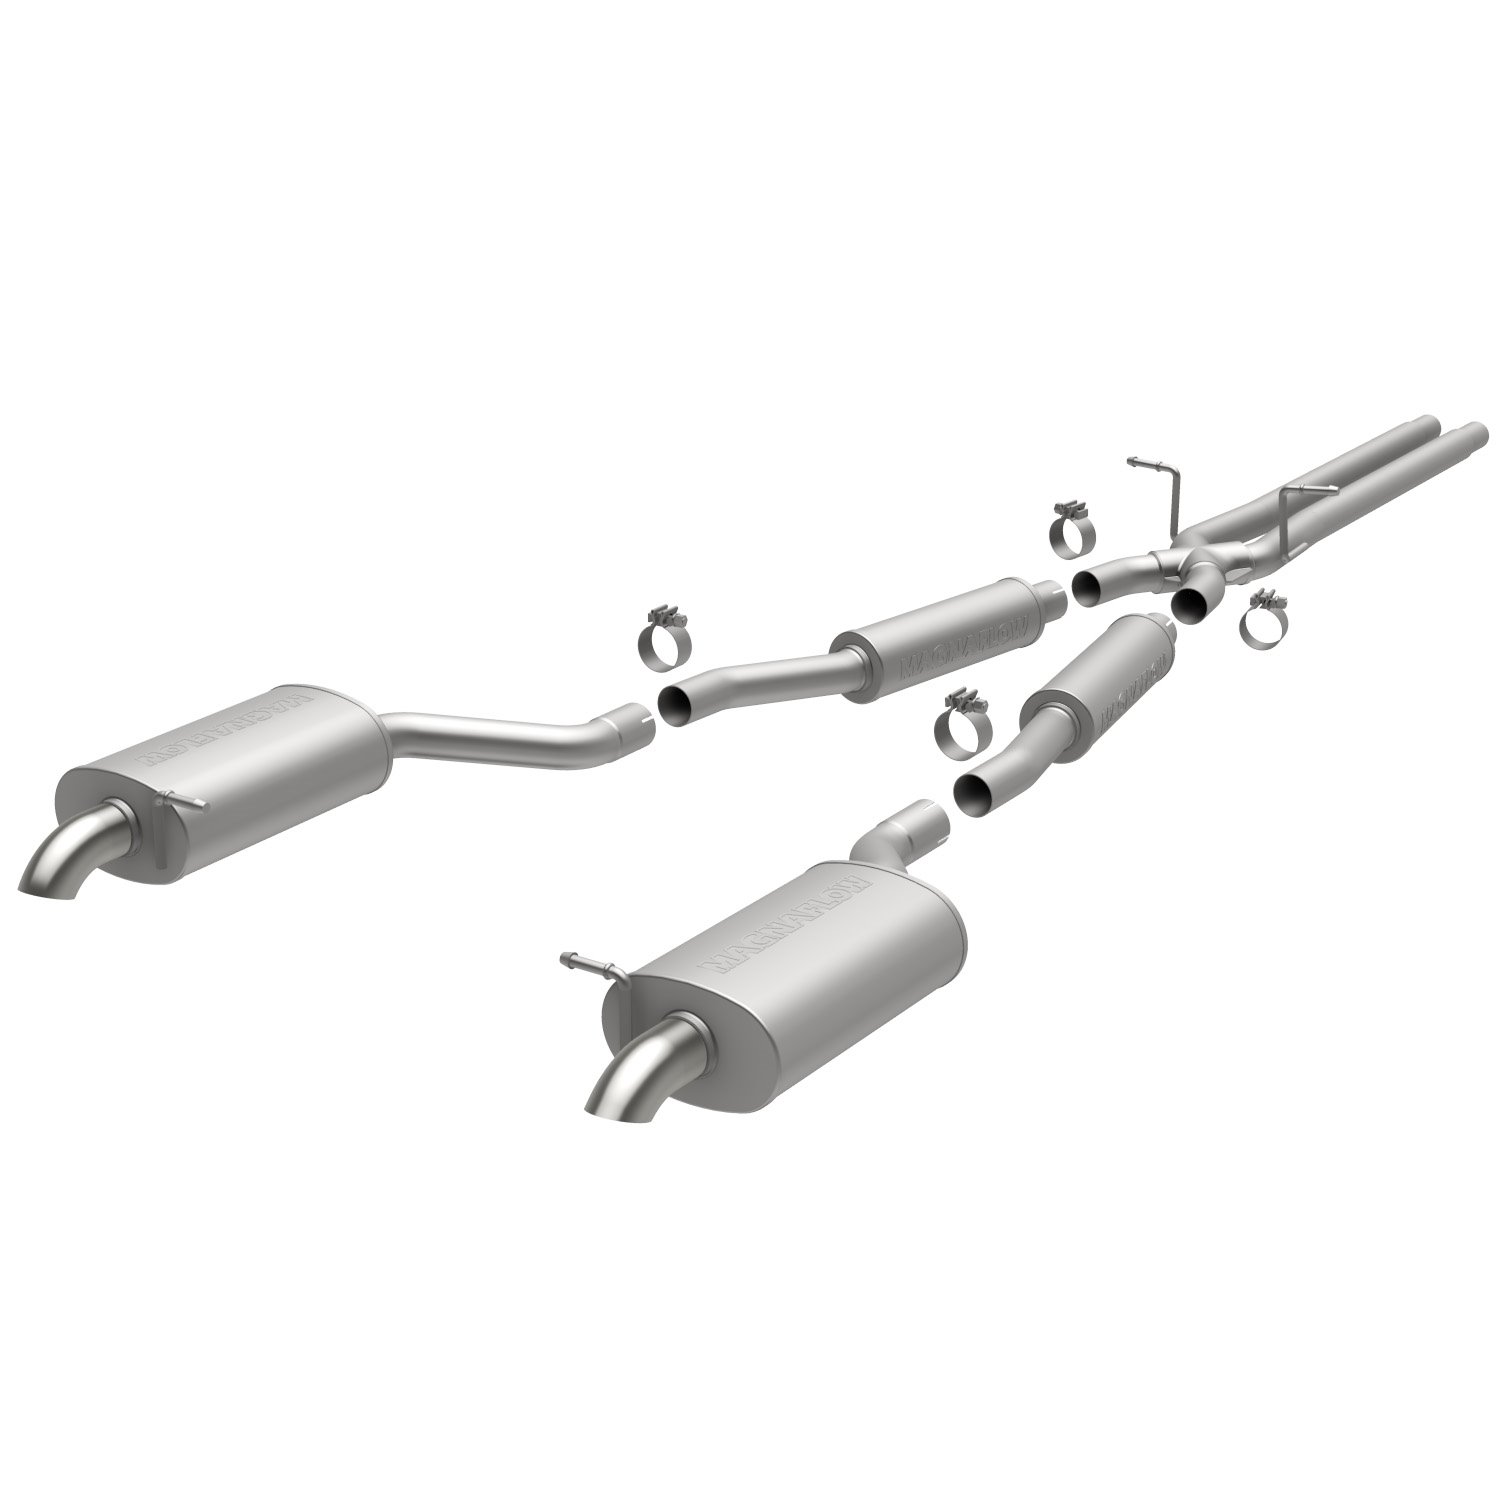 Touring Series Cat-Back Exhaust System 2000-04 Audi A6 Quattro 4.2L V8